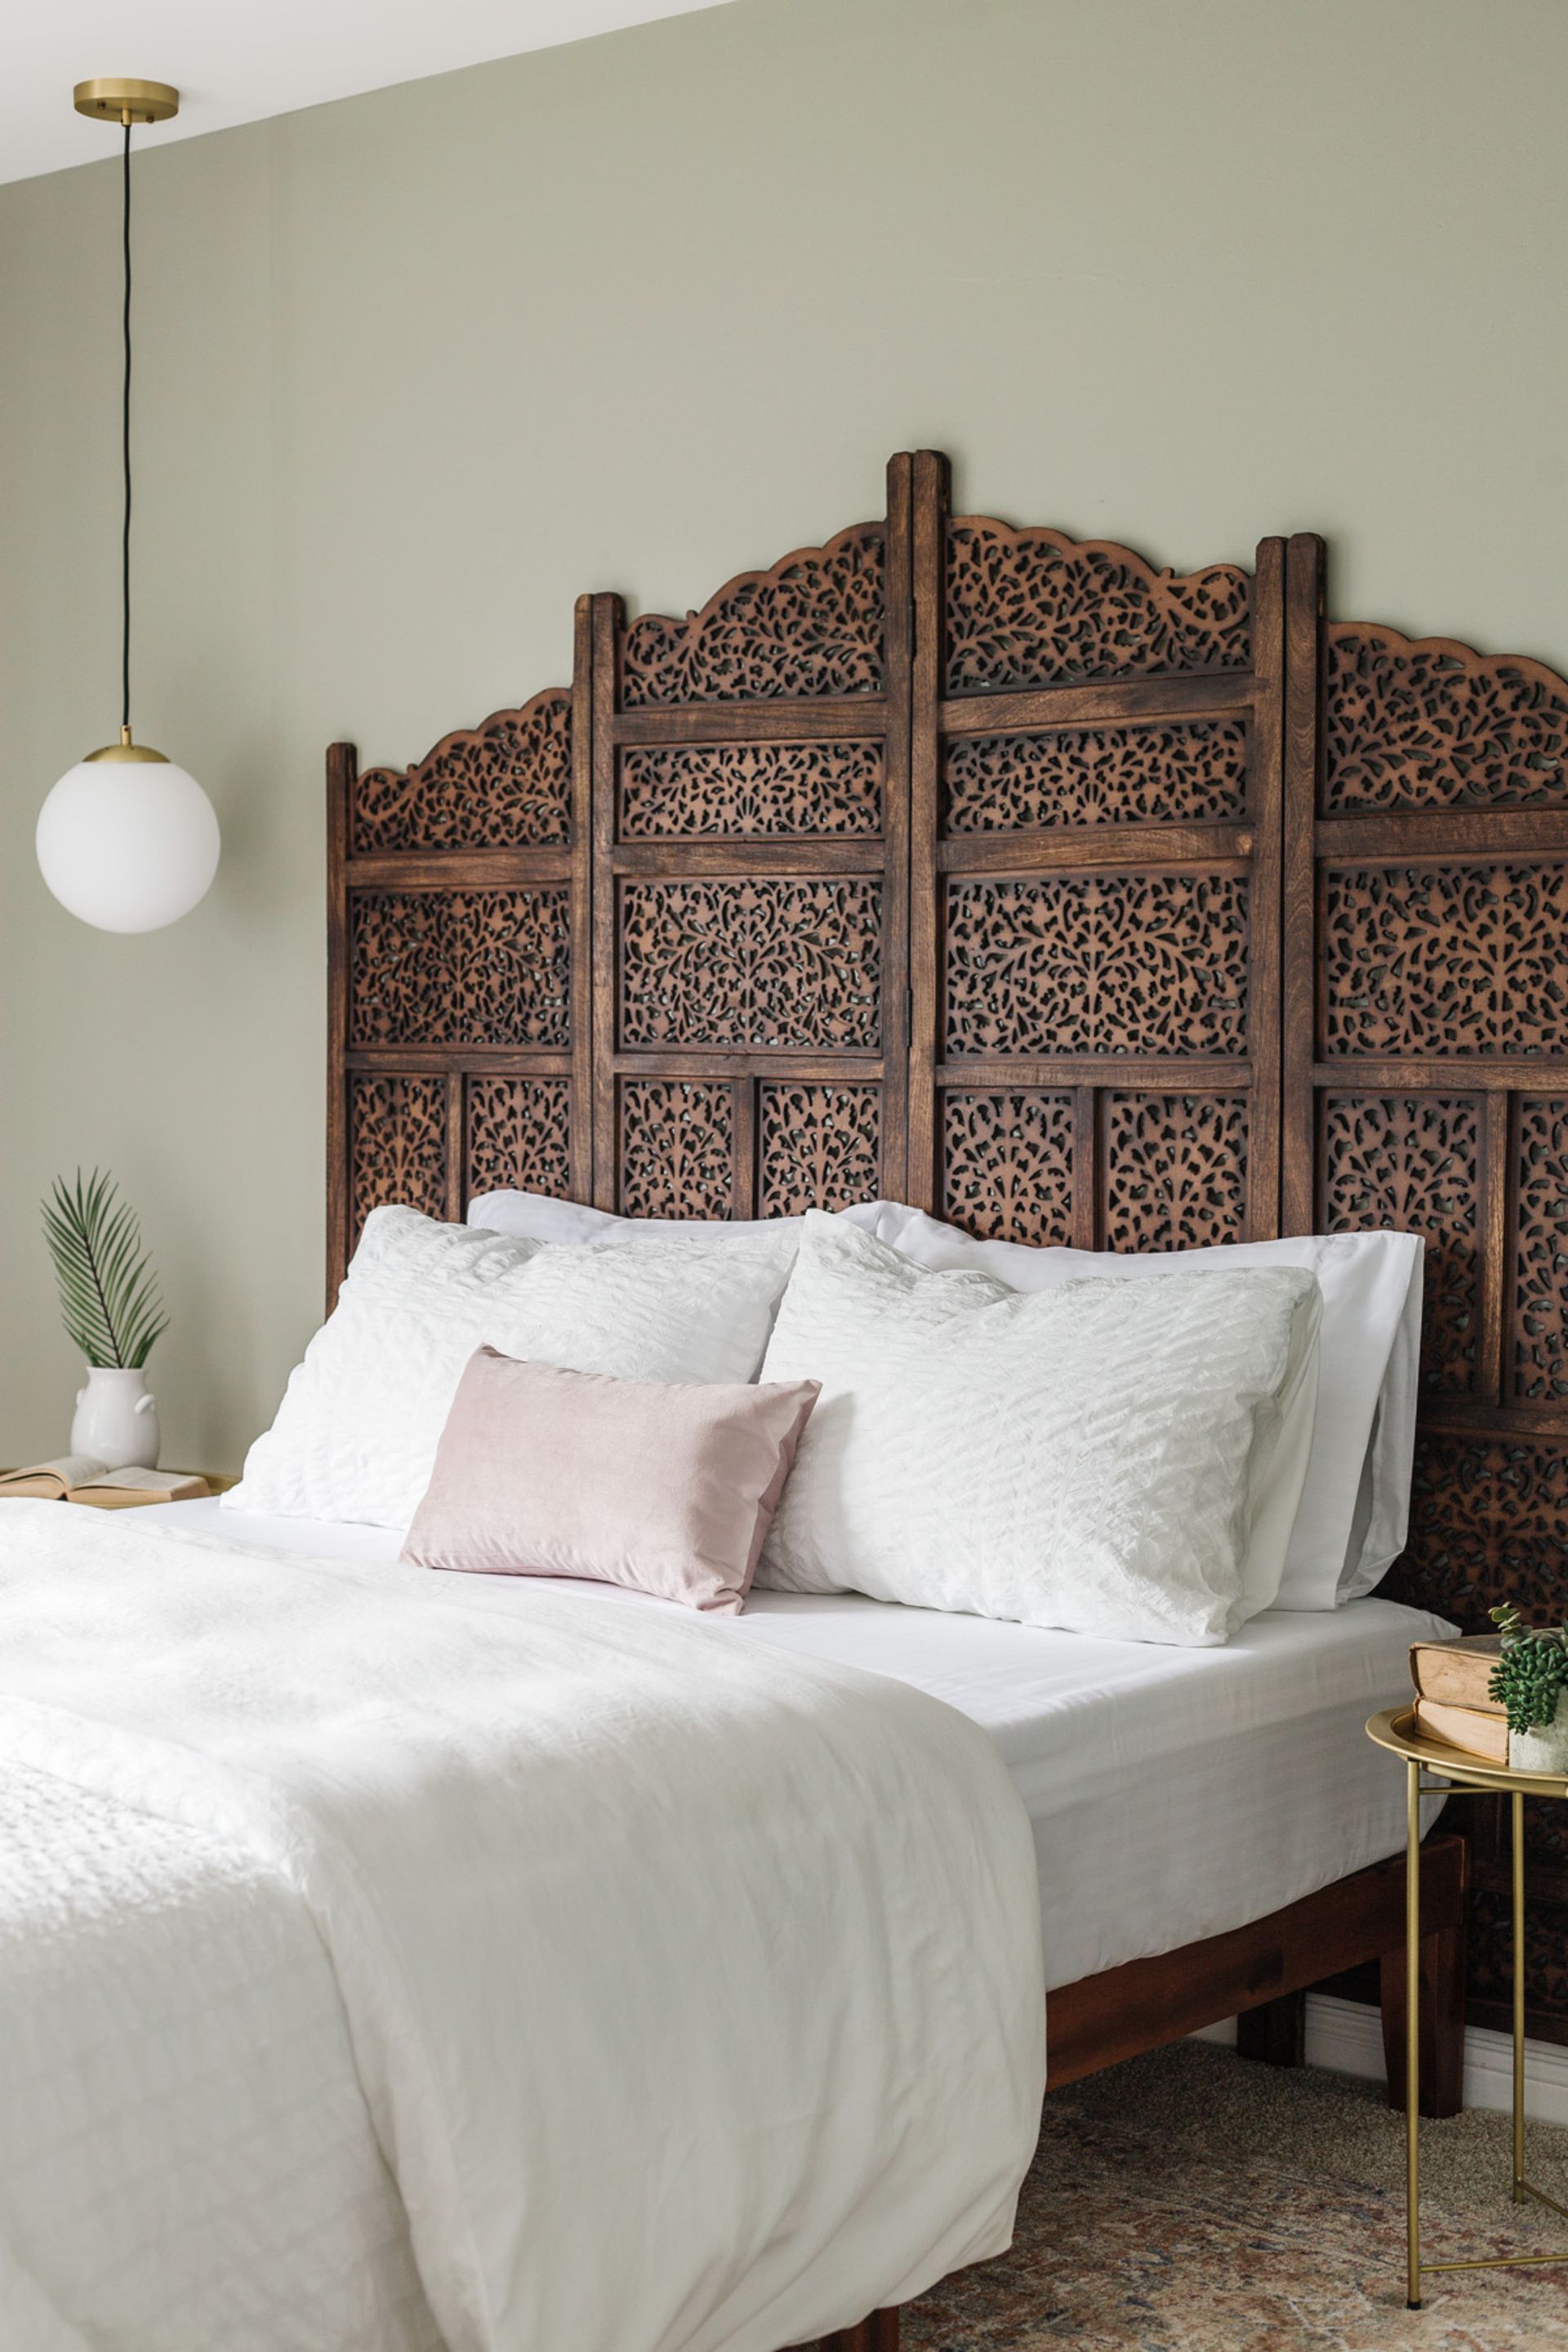 8 no-headboard bedroom designs that can be done in 5 minutes | Livingetc